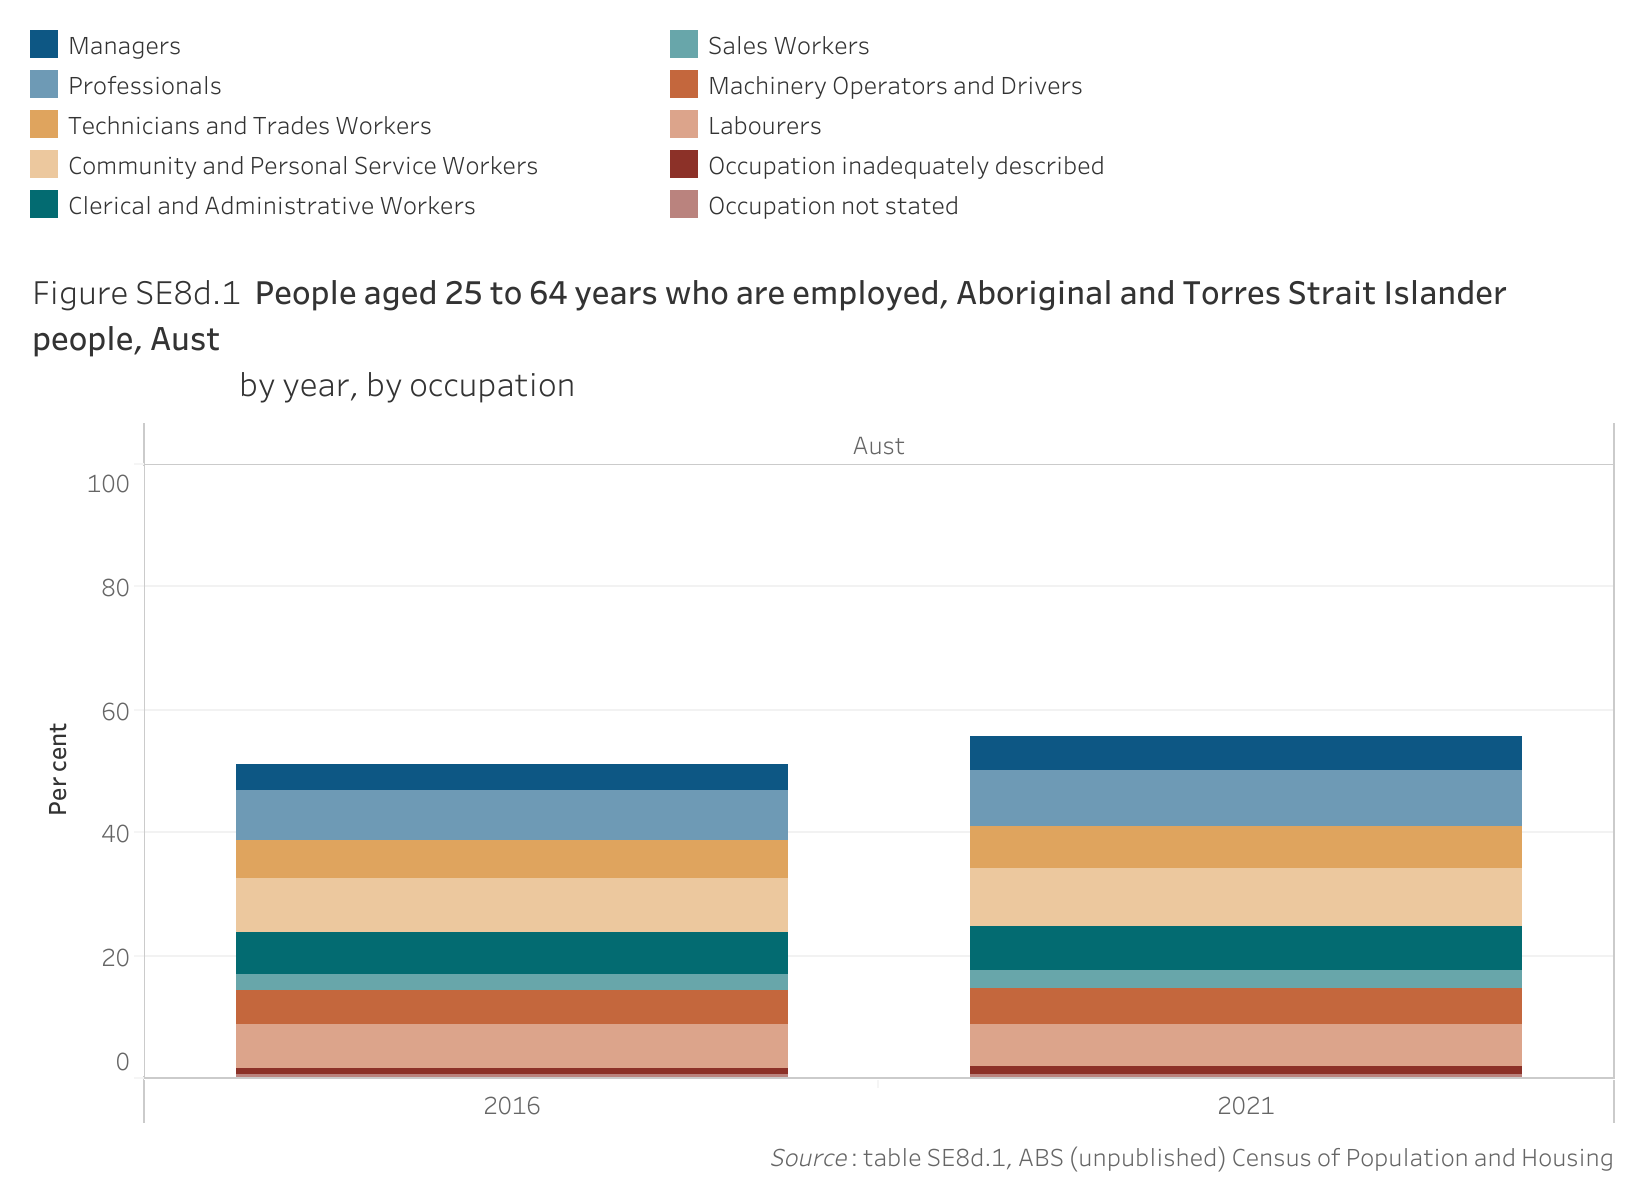 Figure SE8d.1 shows people aged 25 to 64 years who are employed, Aboriginal and Torres Strait Islander people, Australia, by year, by occupation. More details can be found within the text near this image.